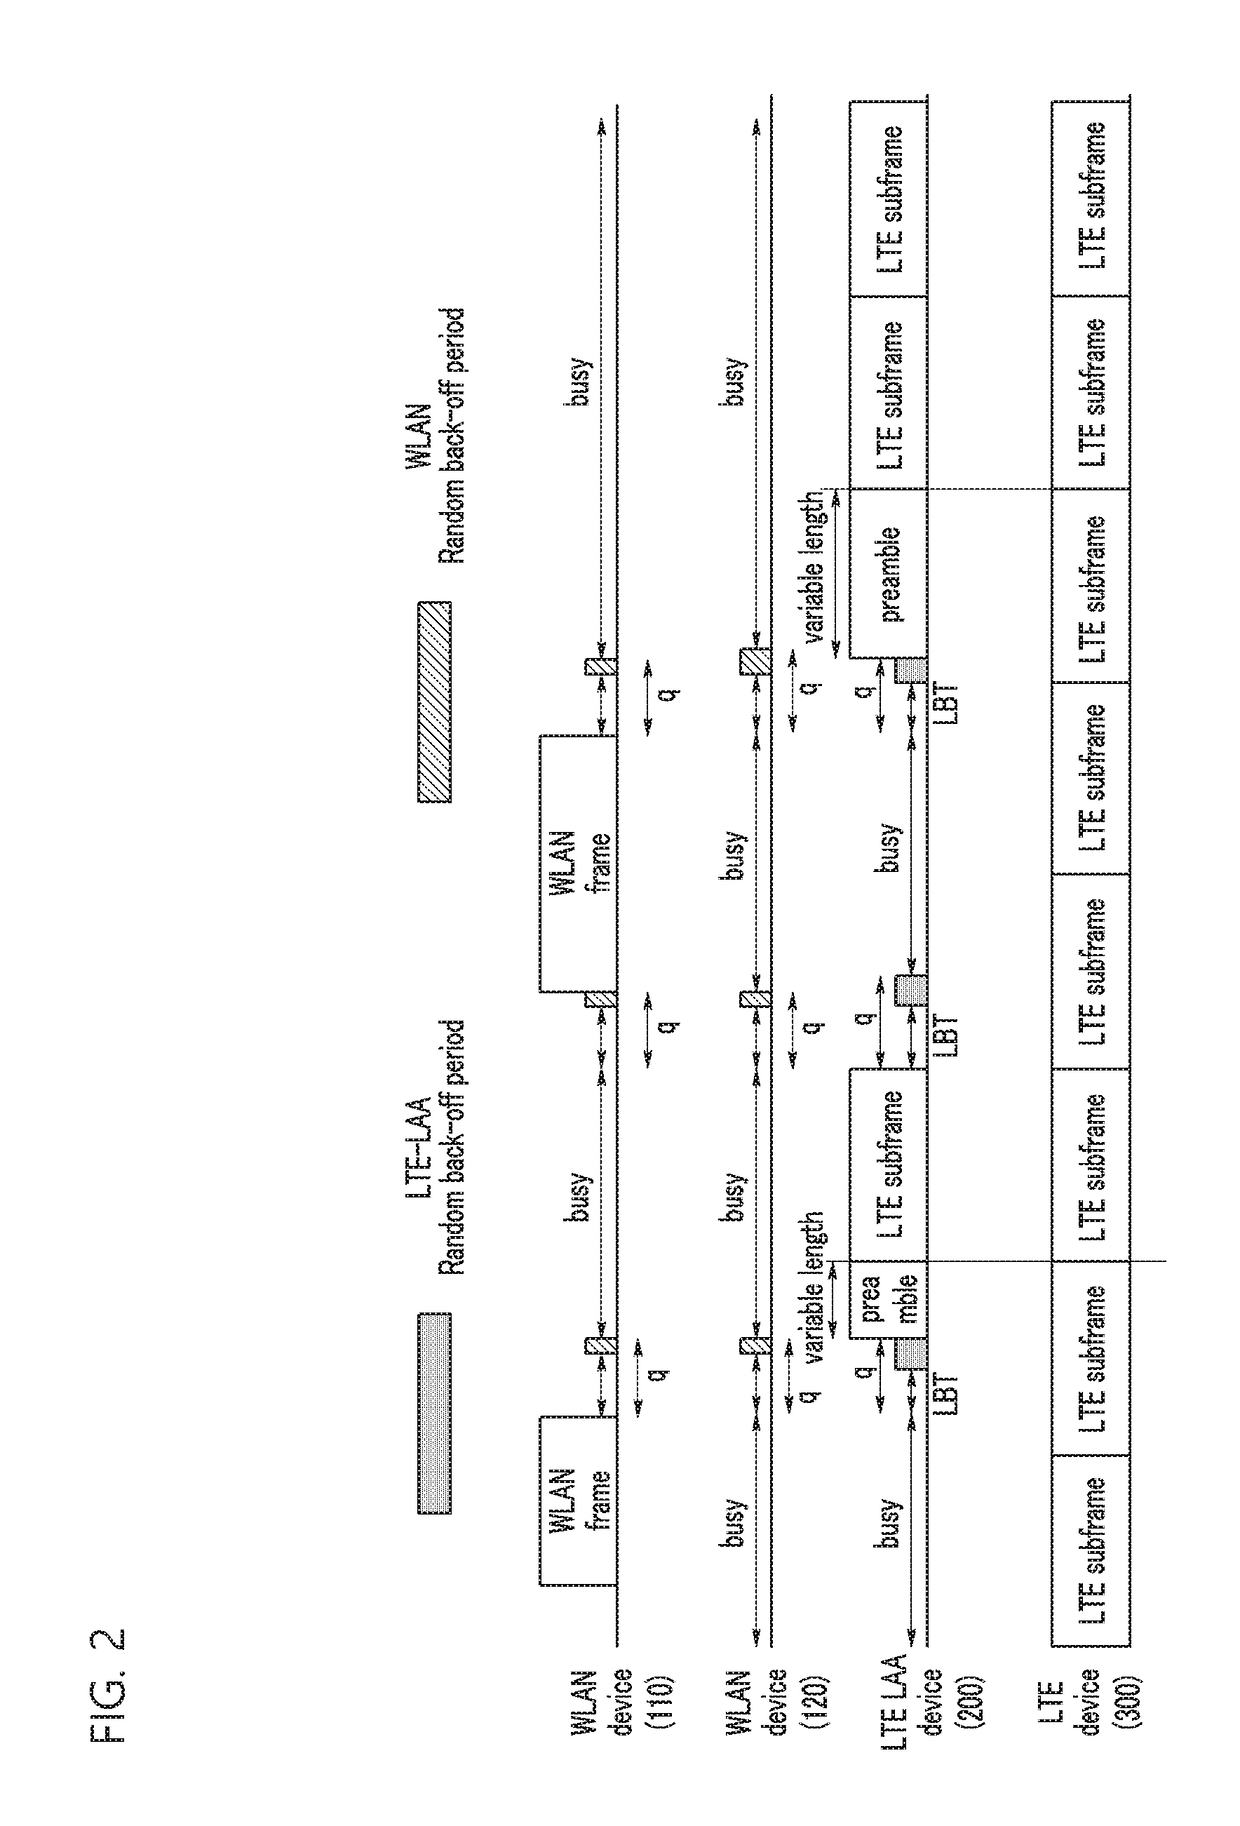 Method and apparatus for transmitting adaptive partial subframe in unlicensed frequency band, method and apparatus for identifying a frame structure, and method and apparatus for transmitting signal